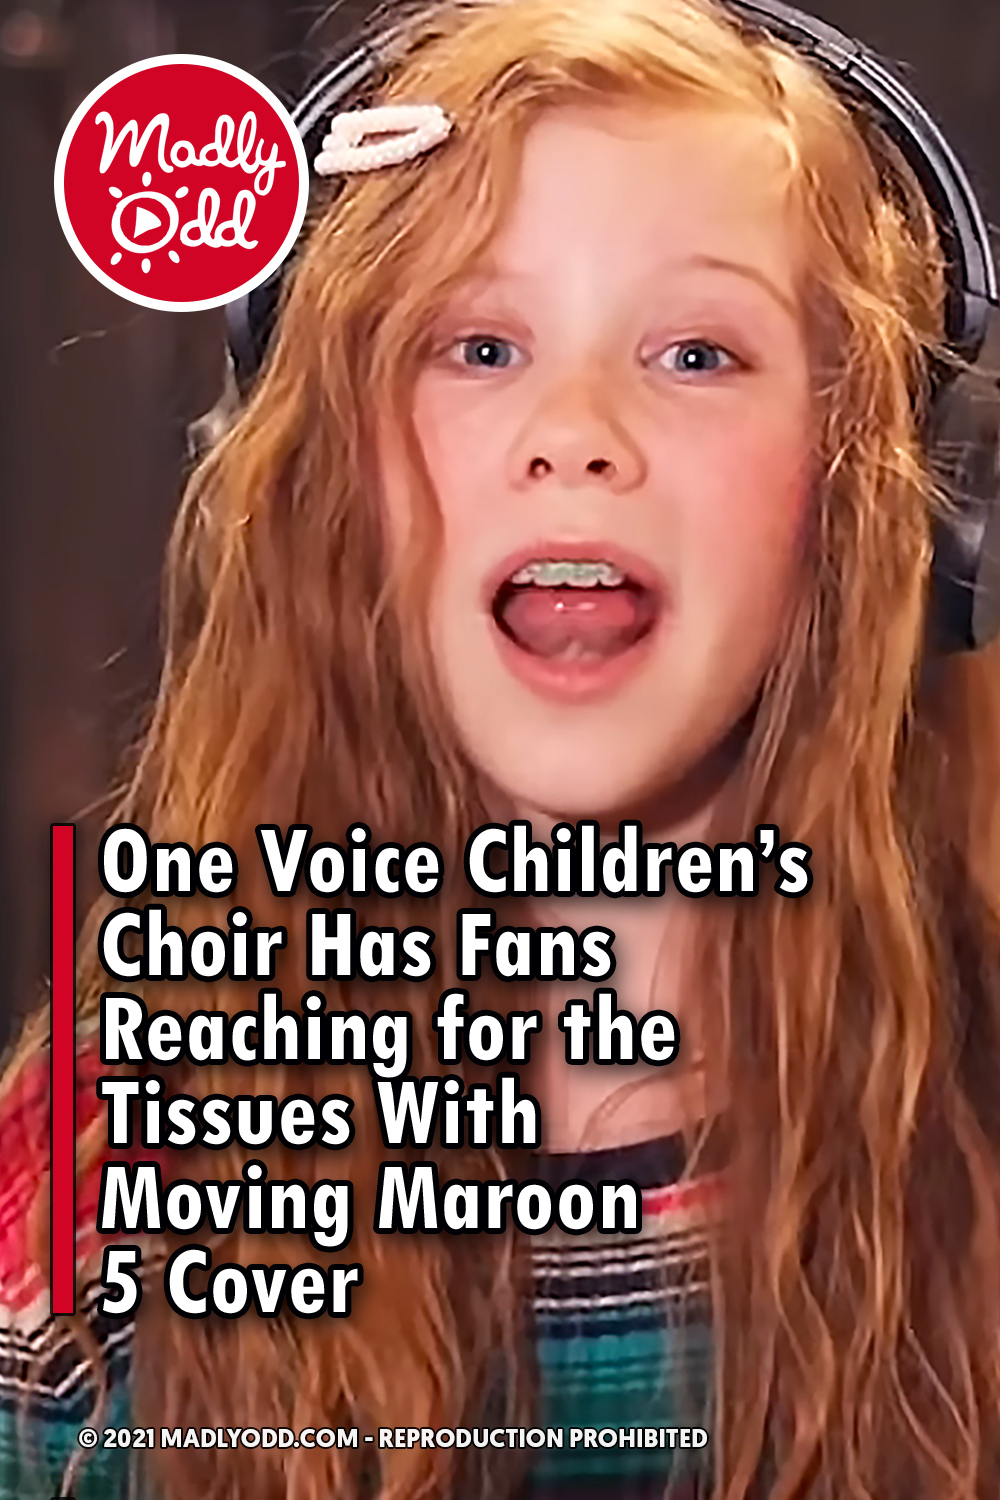 One Voice Children’s Choir Has Fans Reaching for the Tissues With Moving Maroon 5 Cover